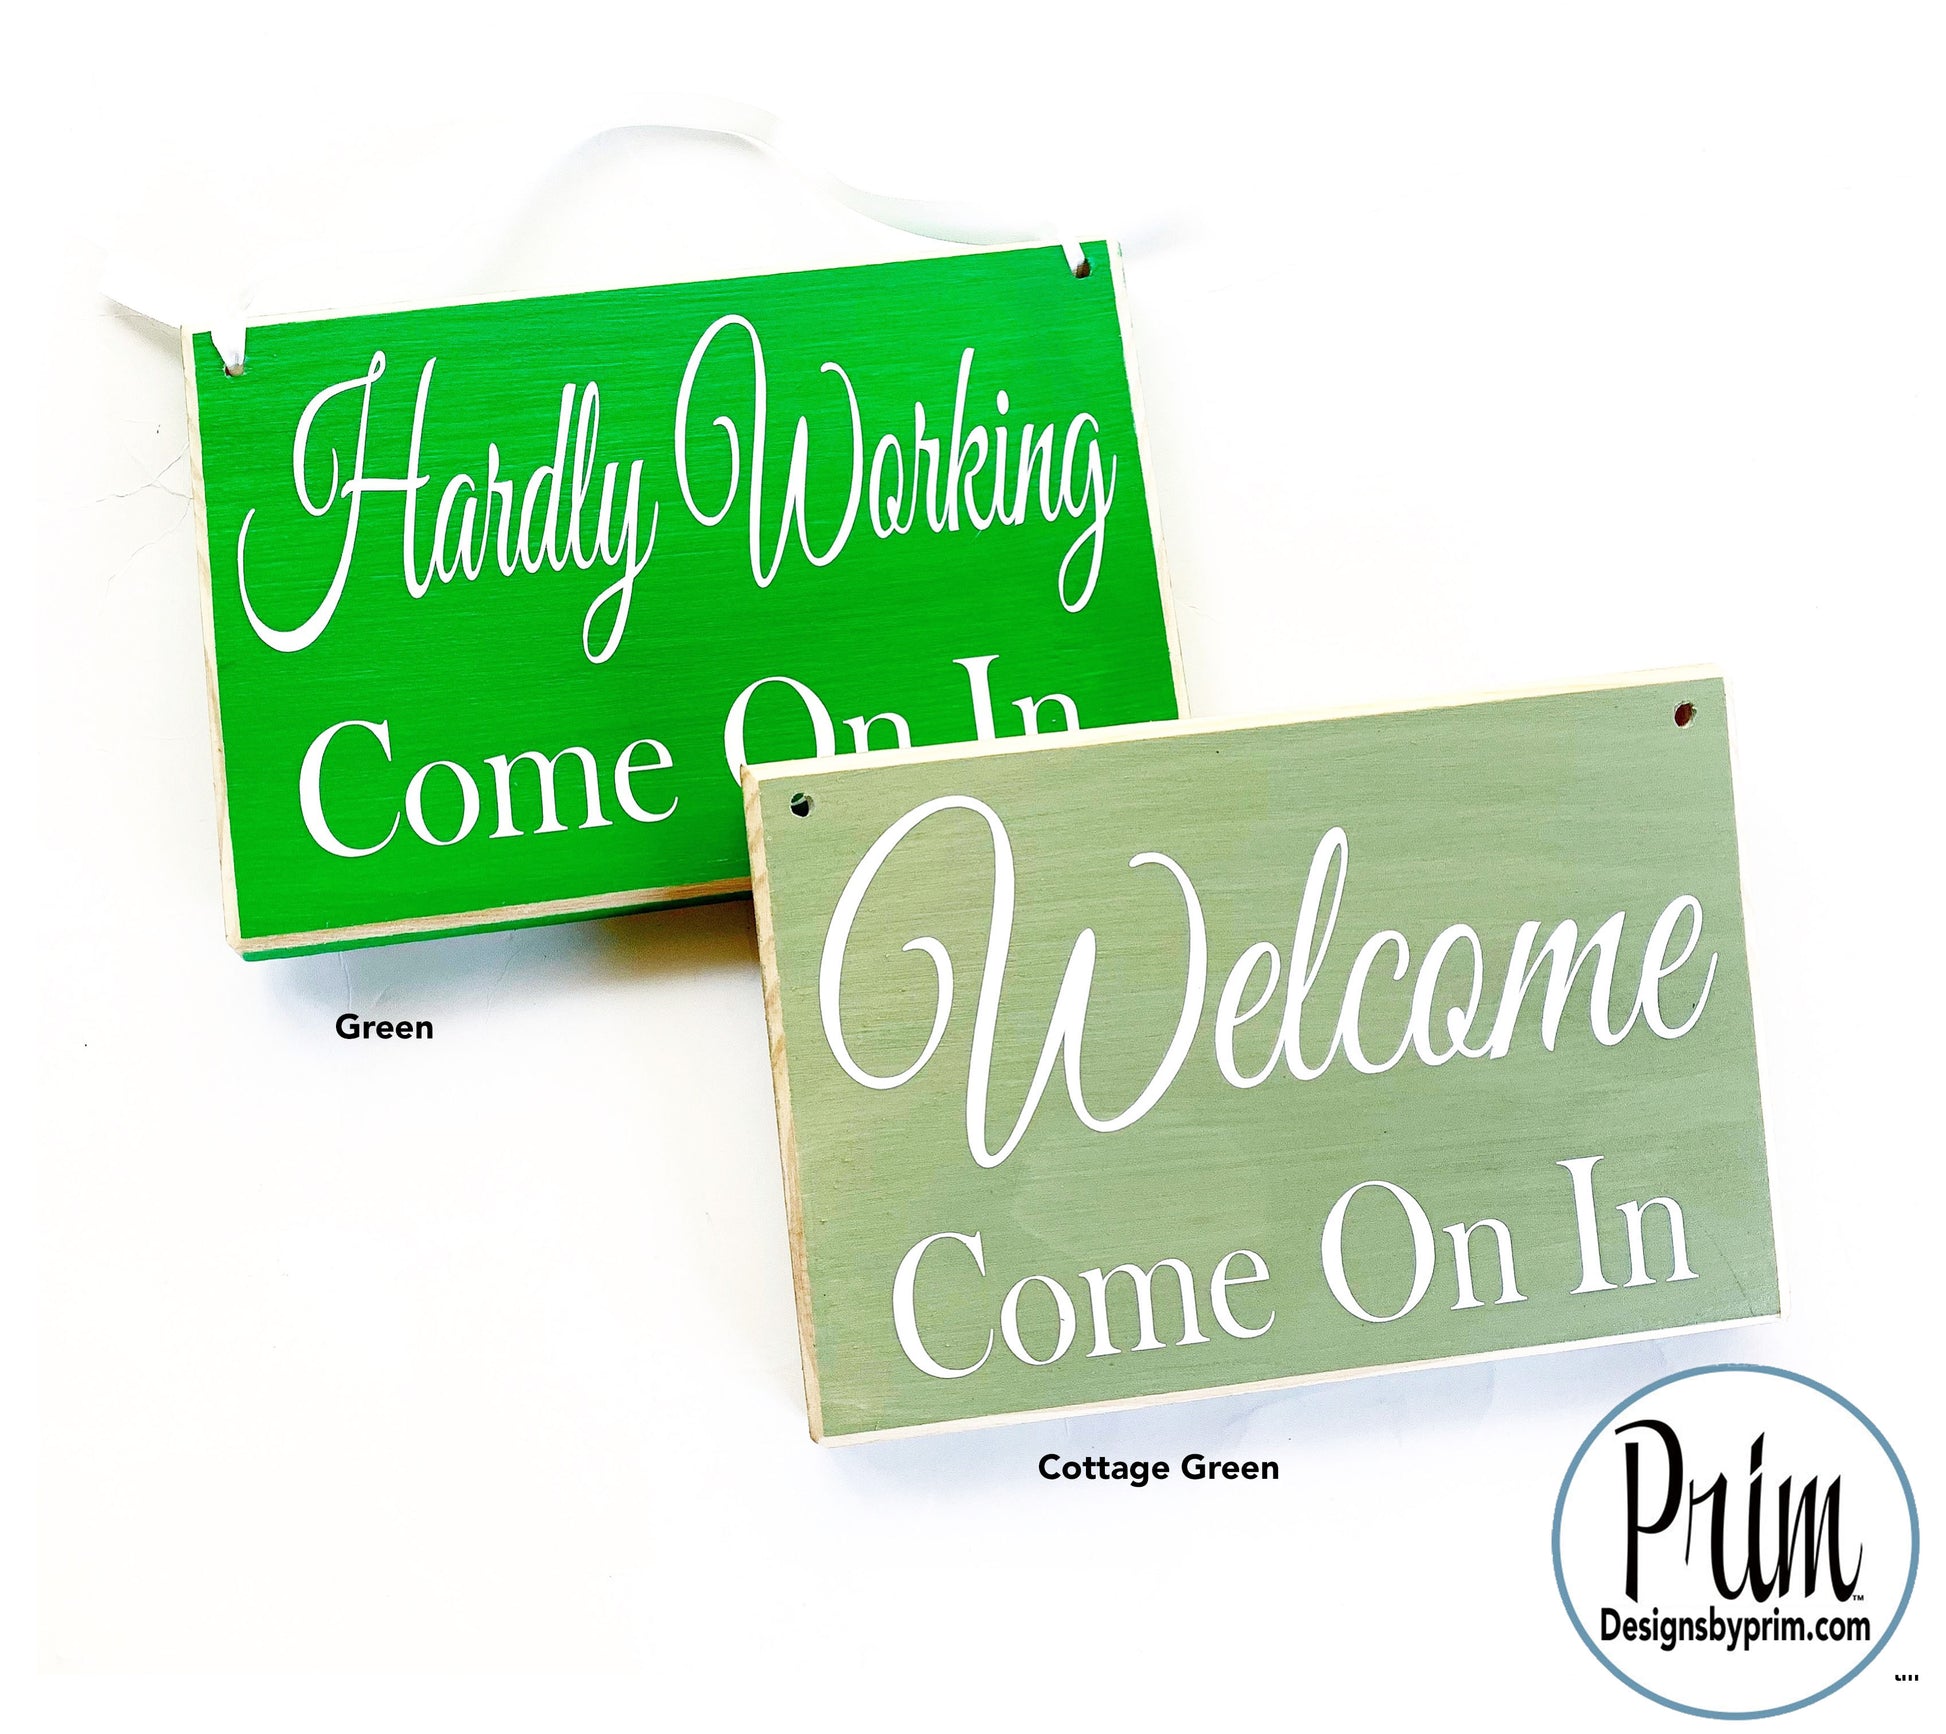 Designs by Prim 8x6 Keep Going Custom Wood Sign | Small Business Owner Work Hard Empire Entrepreneur Hustle Motivational Self Made Paid Door Plaque